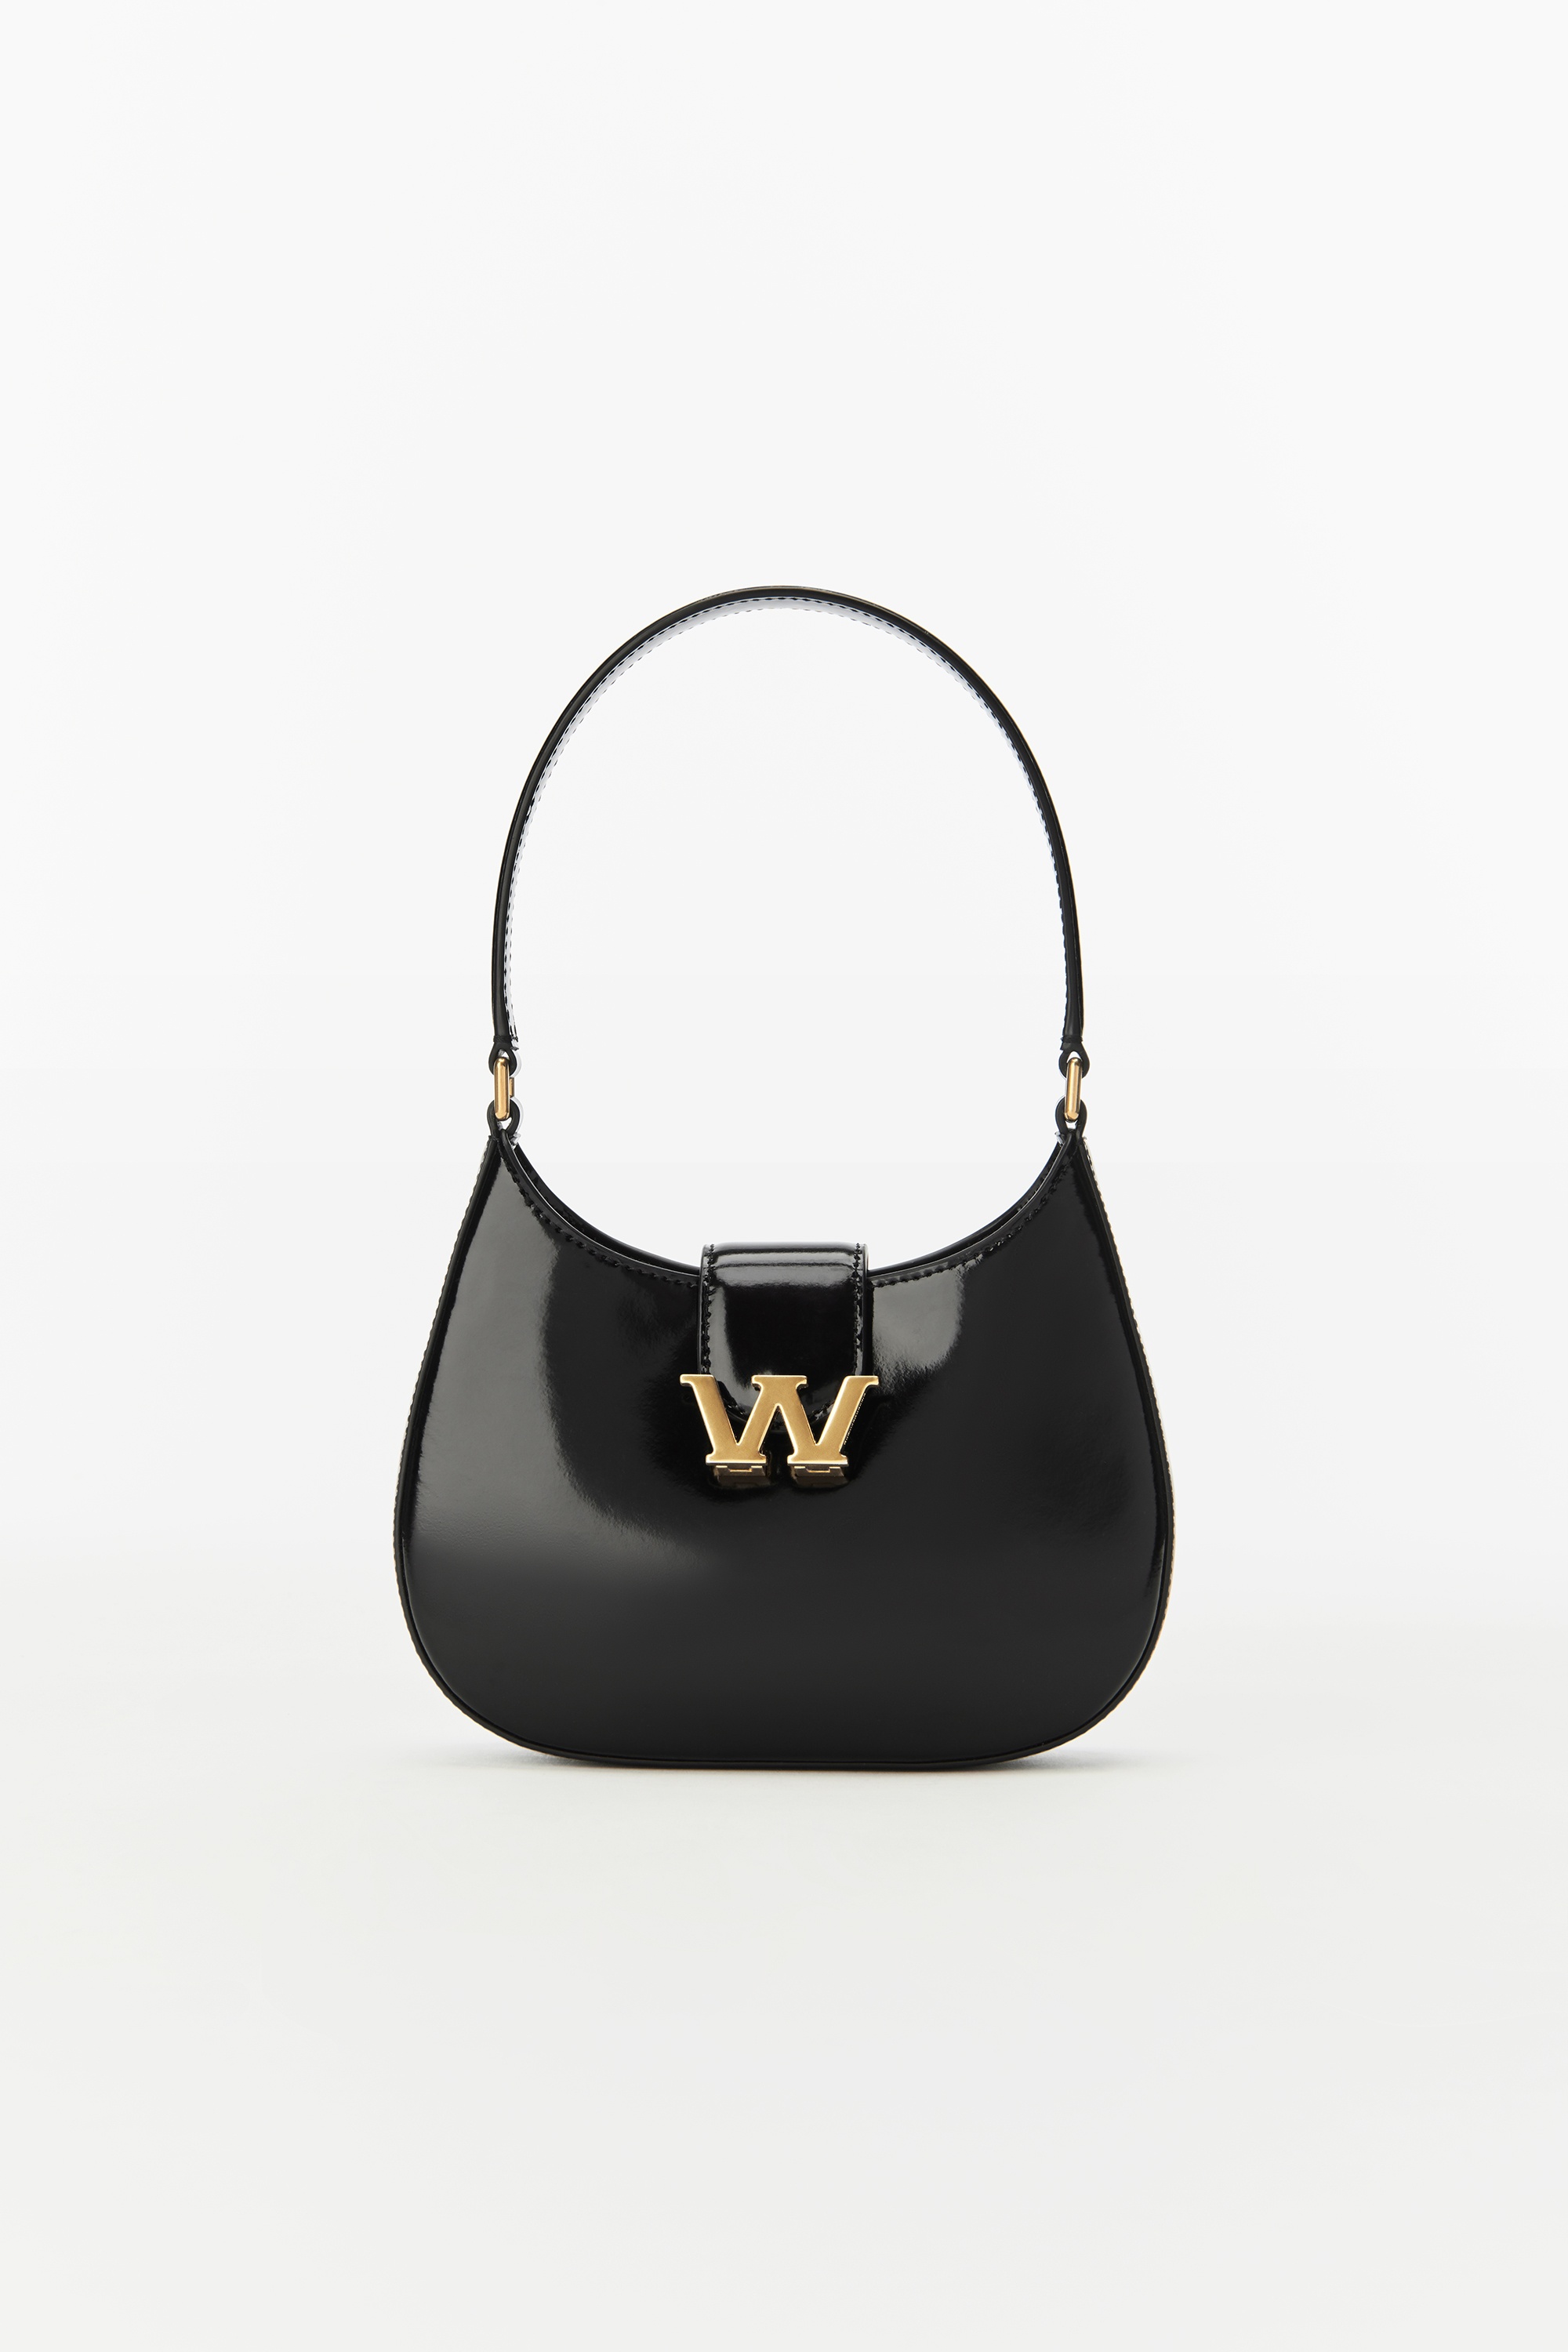 W LEGACY SMALL HOBO IN LEATHER - 1